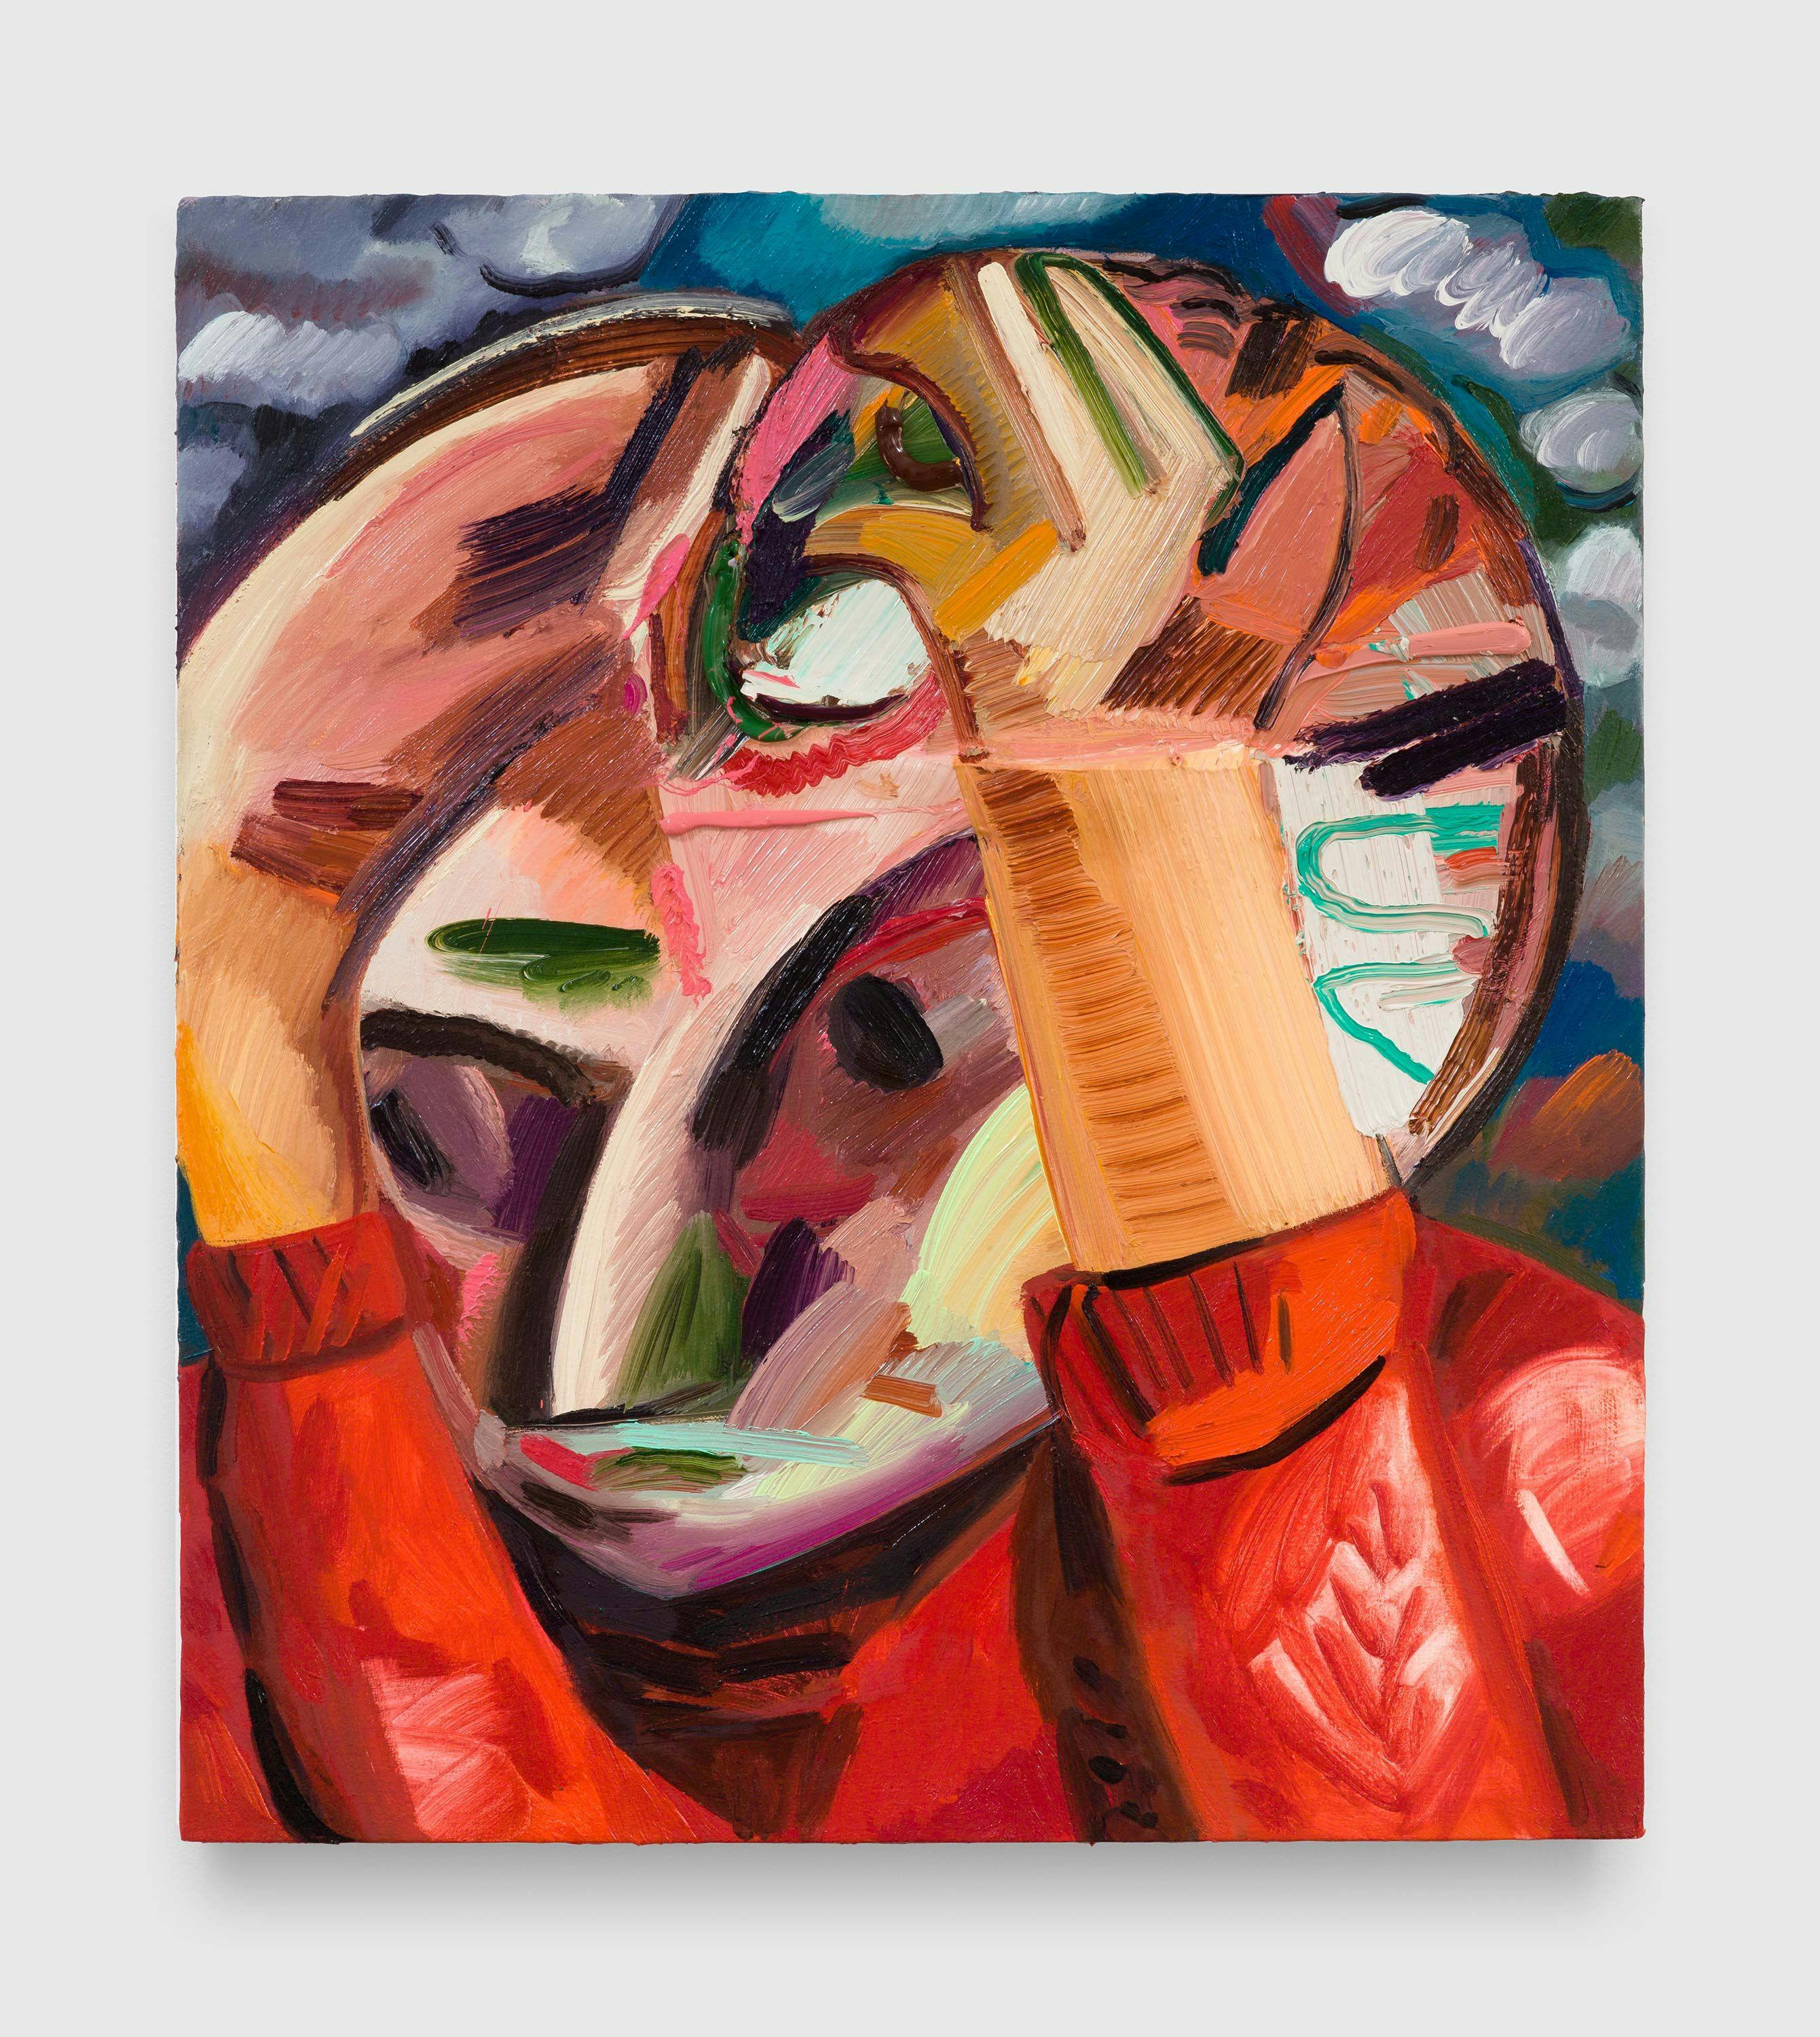 A painting by Dana Schutz, titled To Have a Head, dated 2017.